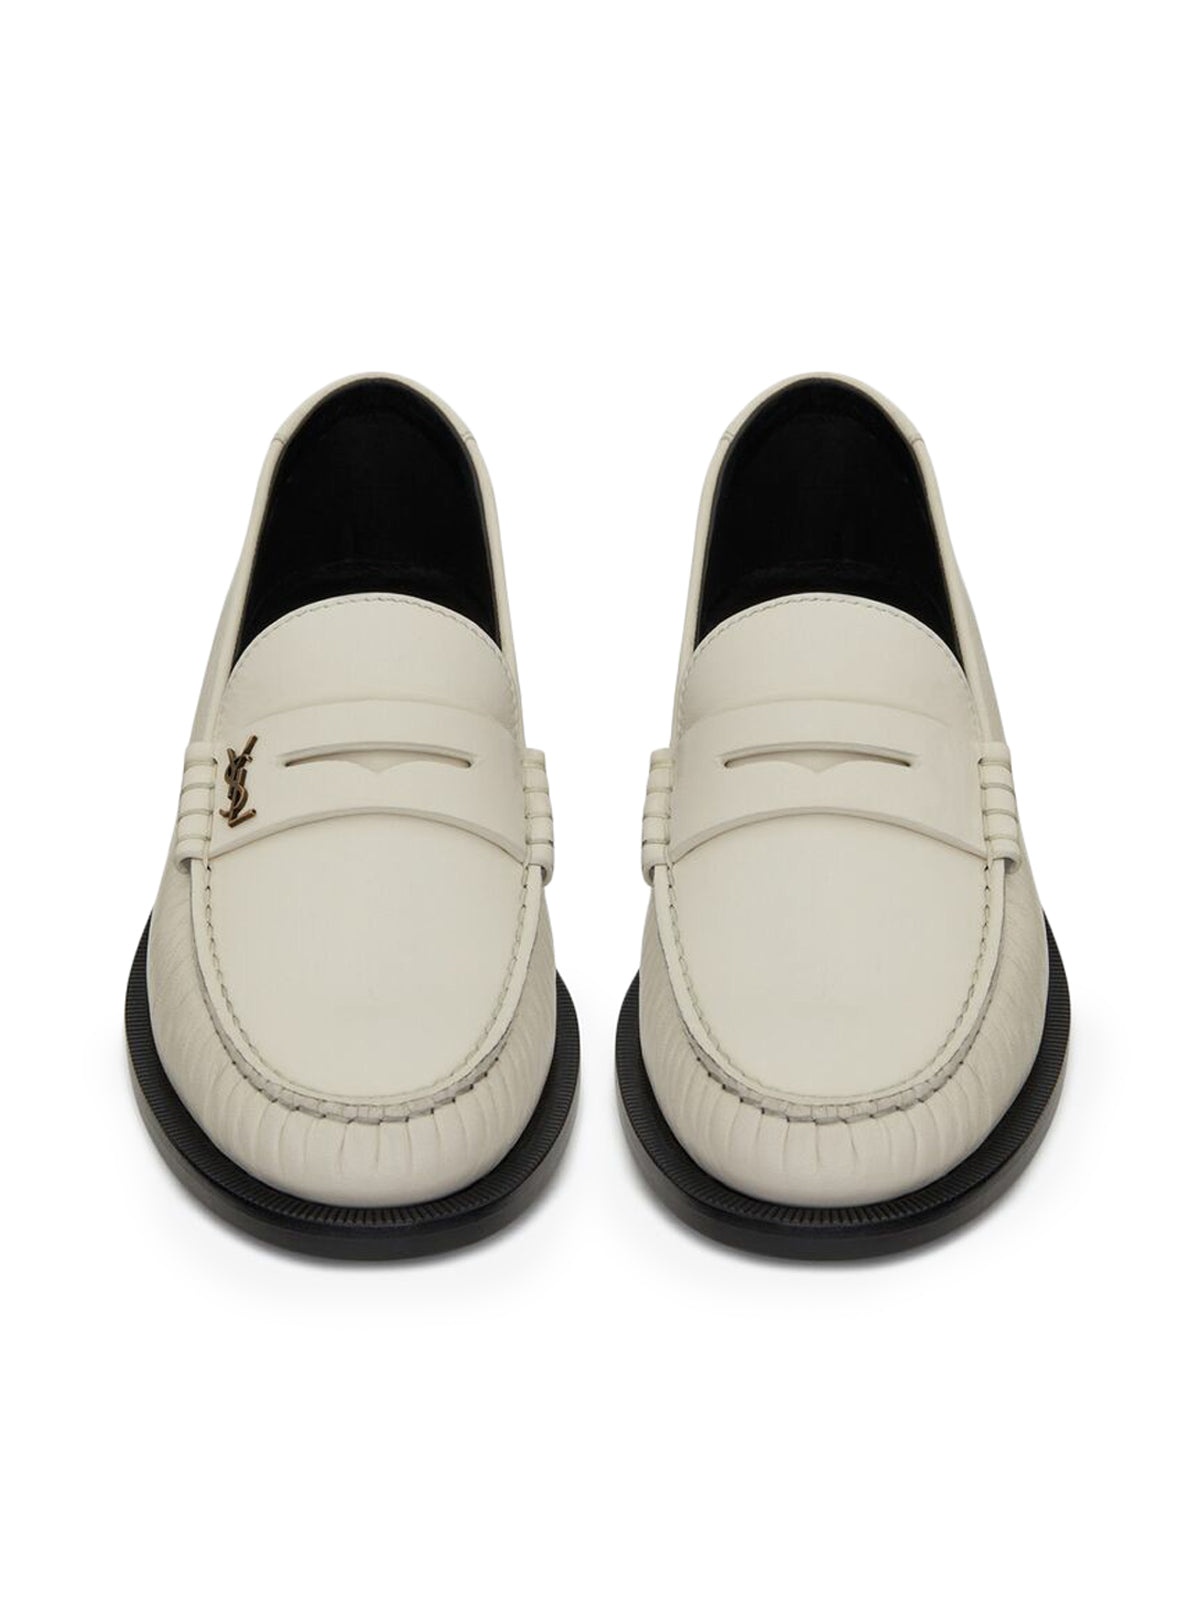 MONOGRAM LOAFERS IN SMOOTH LEATHER - 3